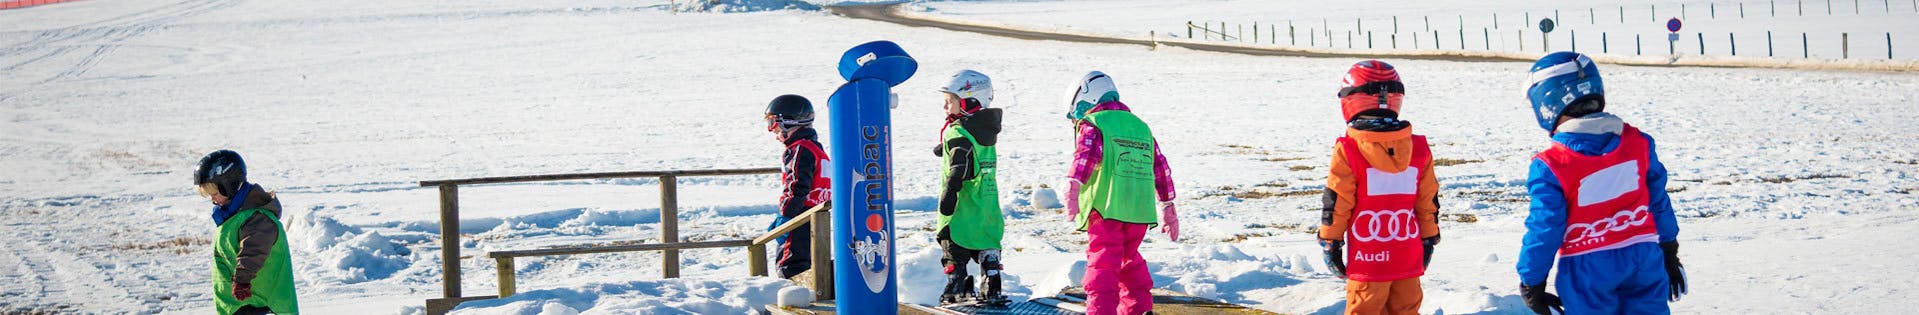 Kids on magic carpet during the Kids Ski Lessons (4-10 y.) for experienced skiers with Ski School Snow & Bike Factory Willingen.